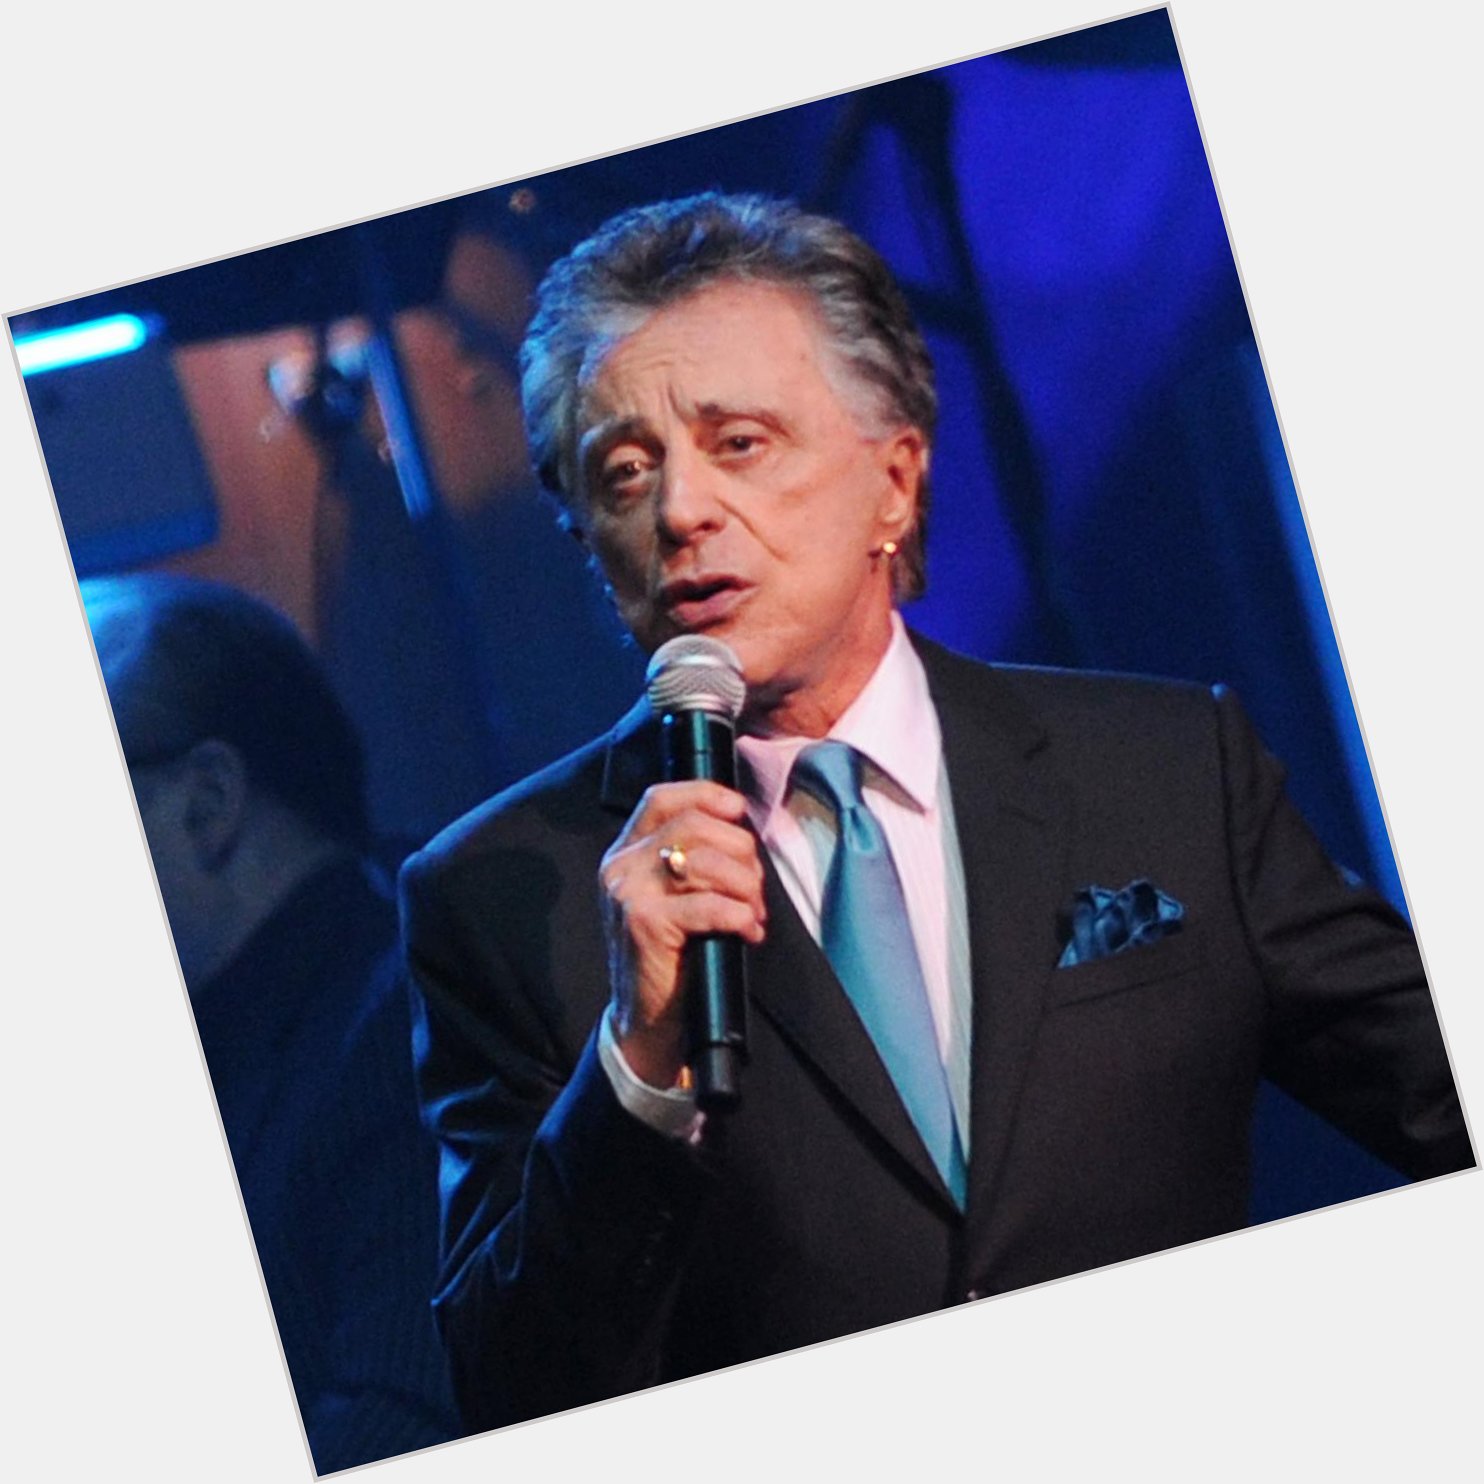 Happy birthday Frankie Valli! He soar to success as a Truth Seeker 7 who embraced his unique falsetto voice. 